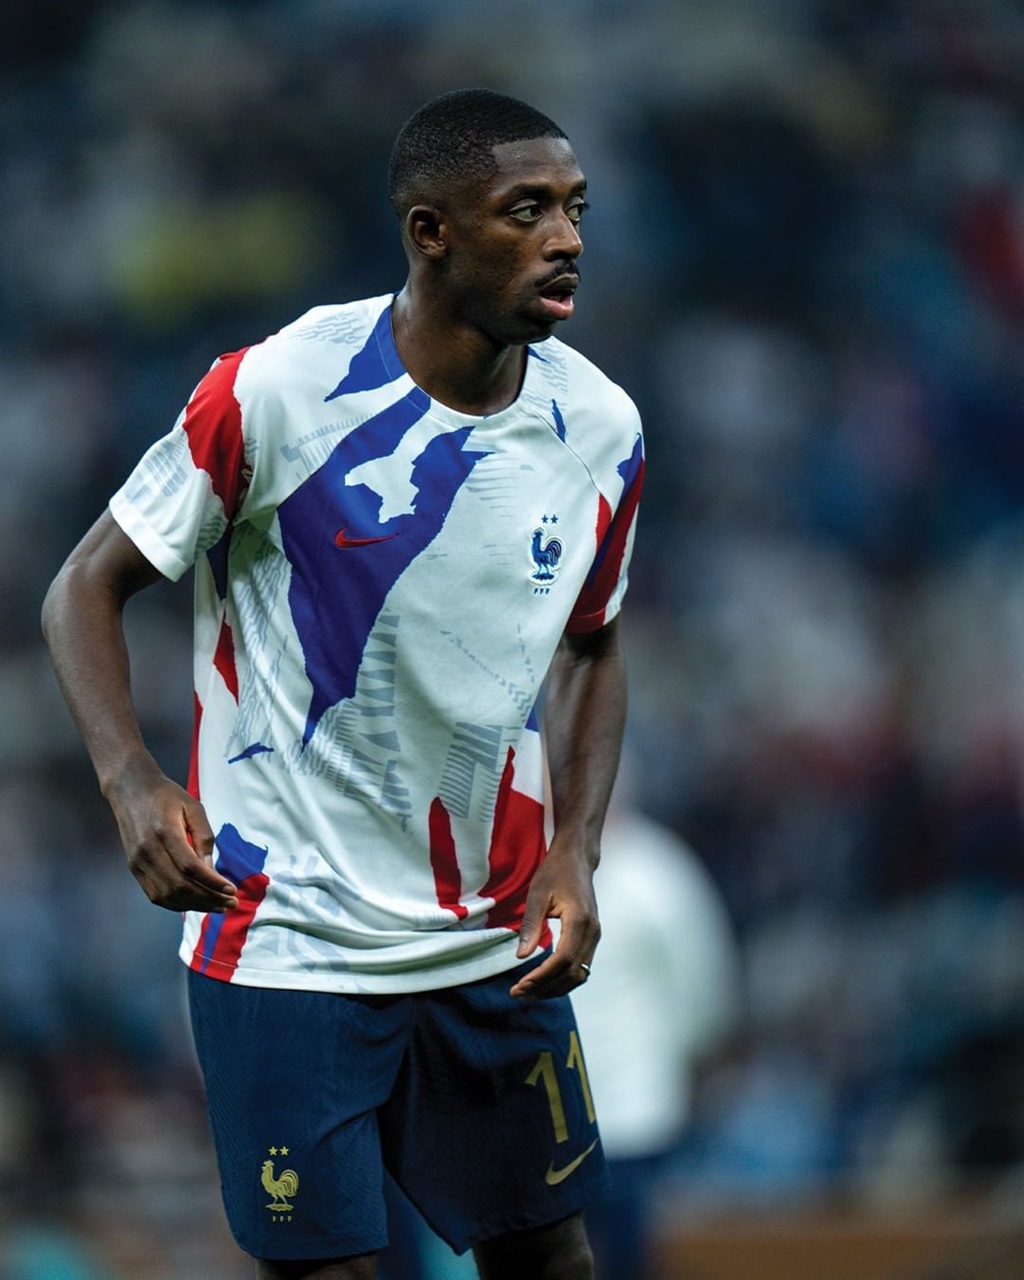 France in their World Cup warm-up jerseys